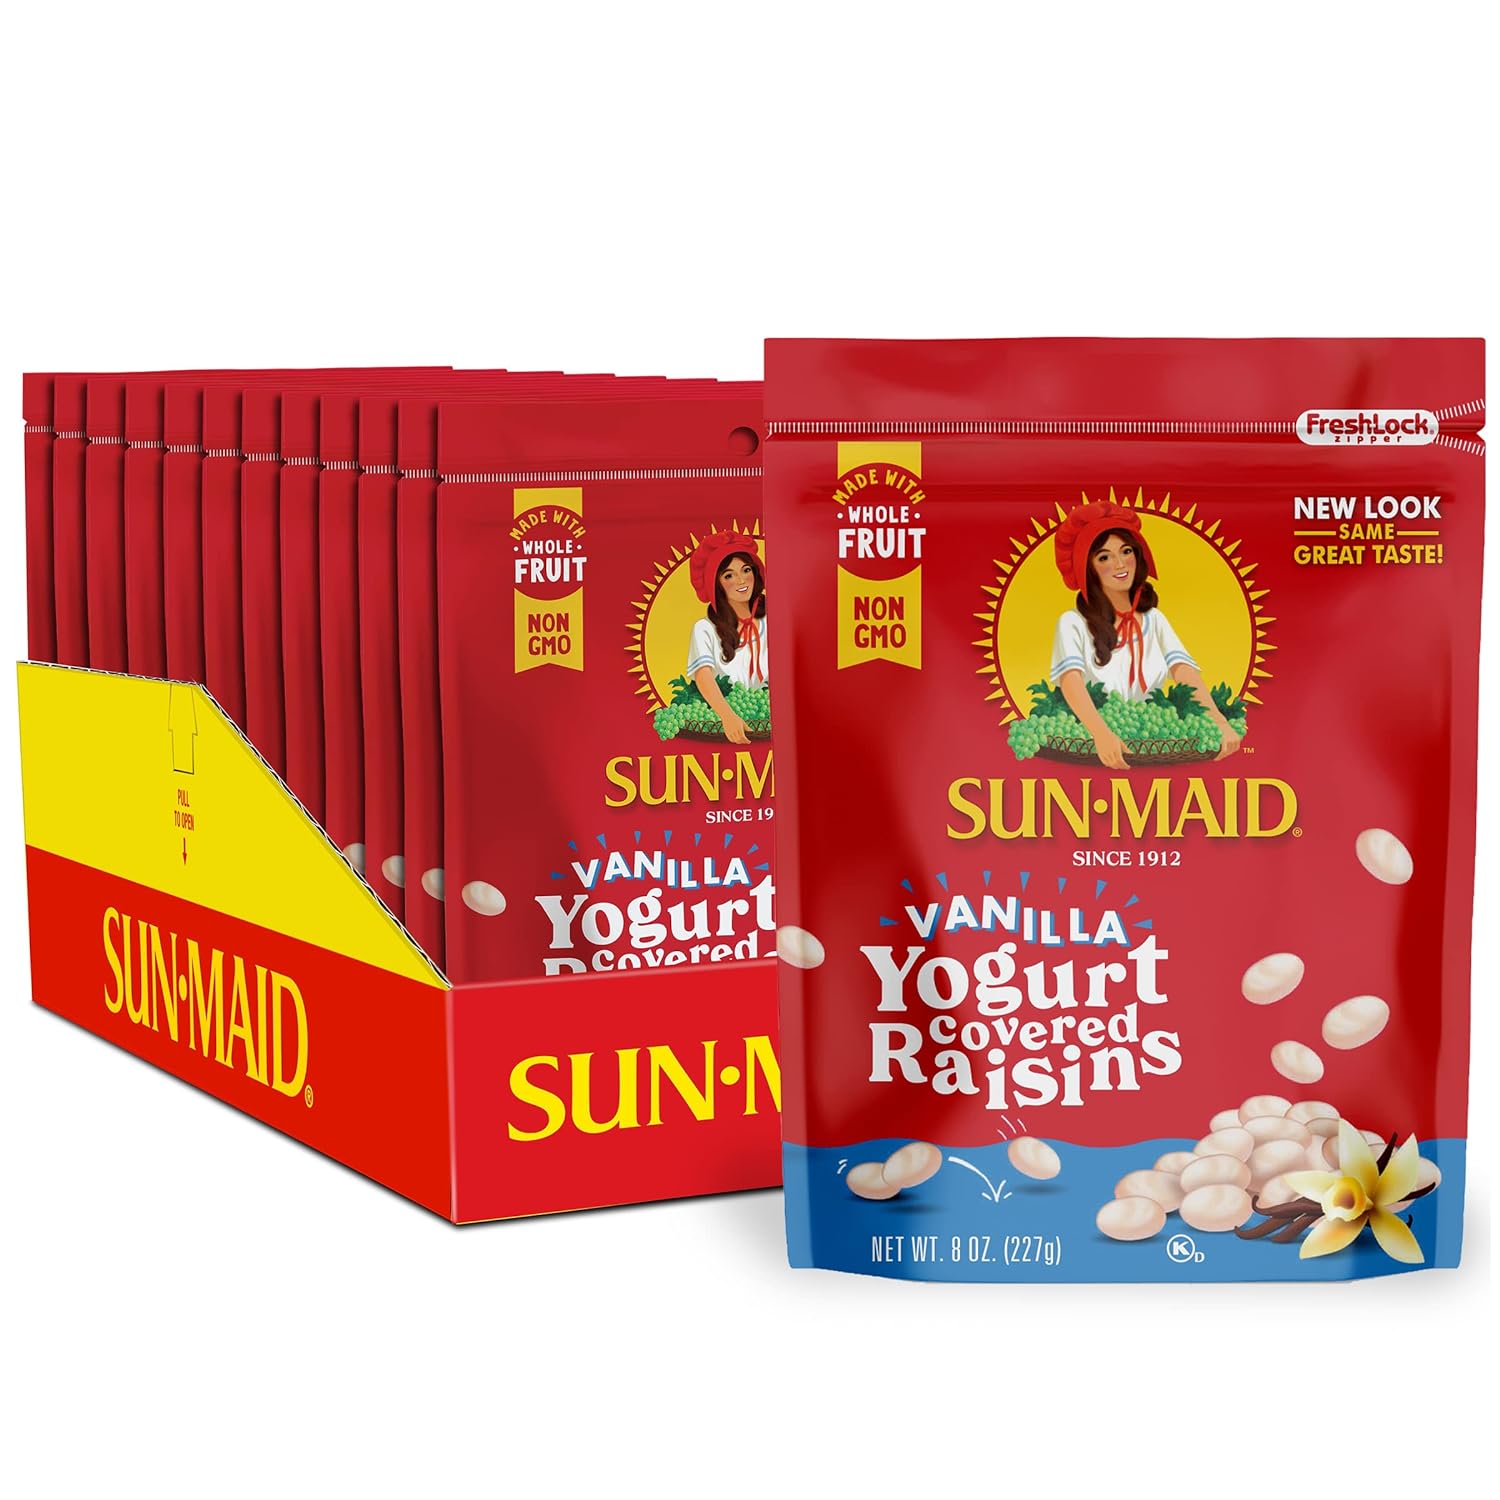 Sun-Maid Vanilla Yogurt Coated Raisins - (12 Pack) 8 oz Resealable Bag - Yogurt Covered Dried Fruit Snack for Lunches and Snacks